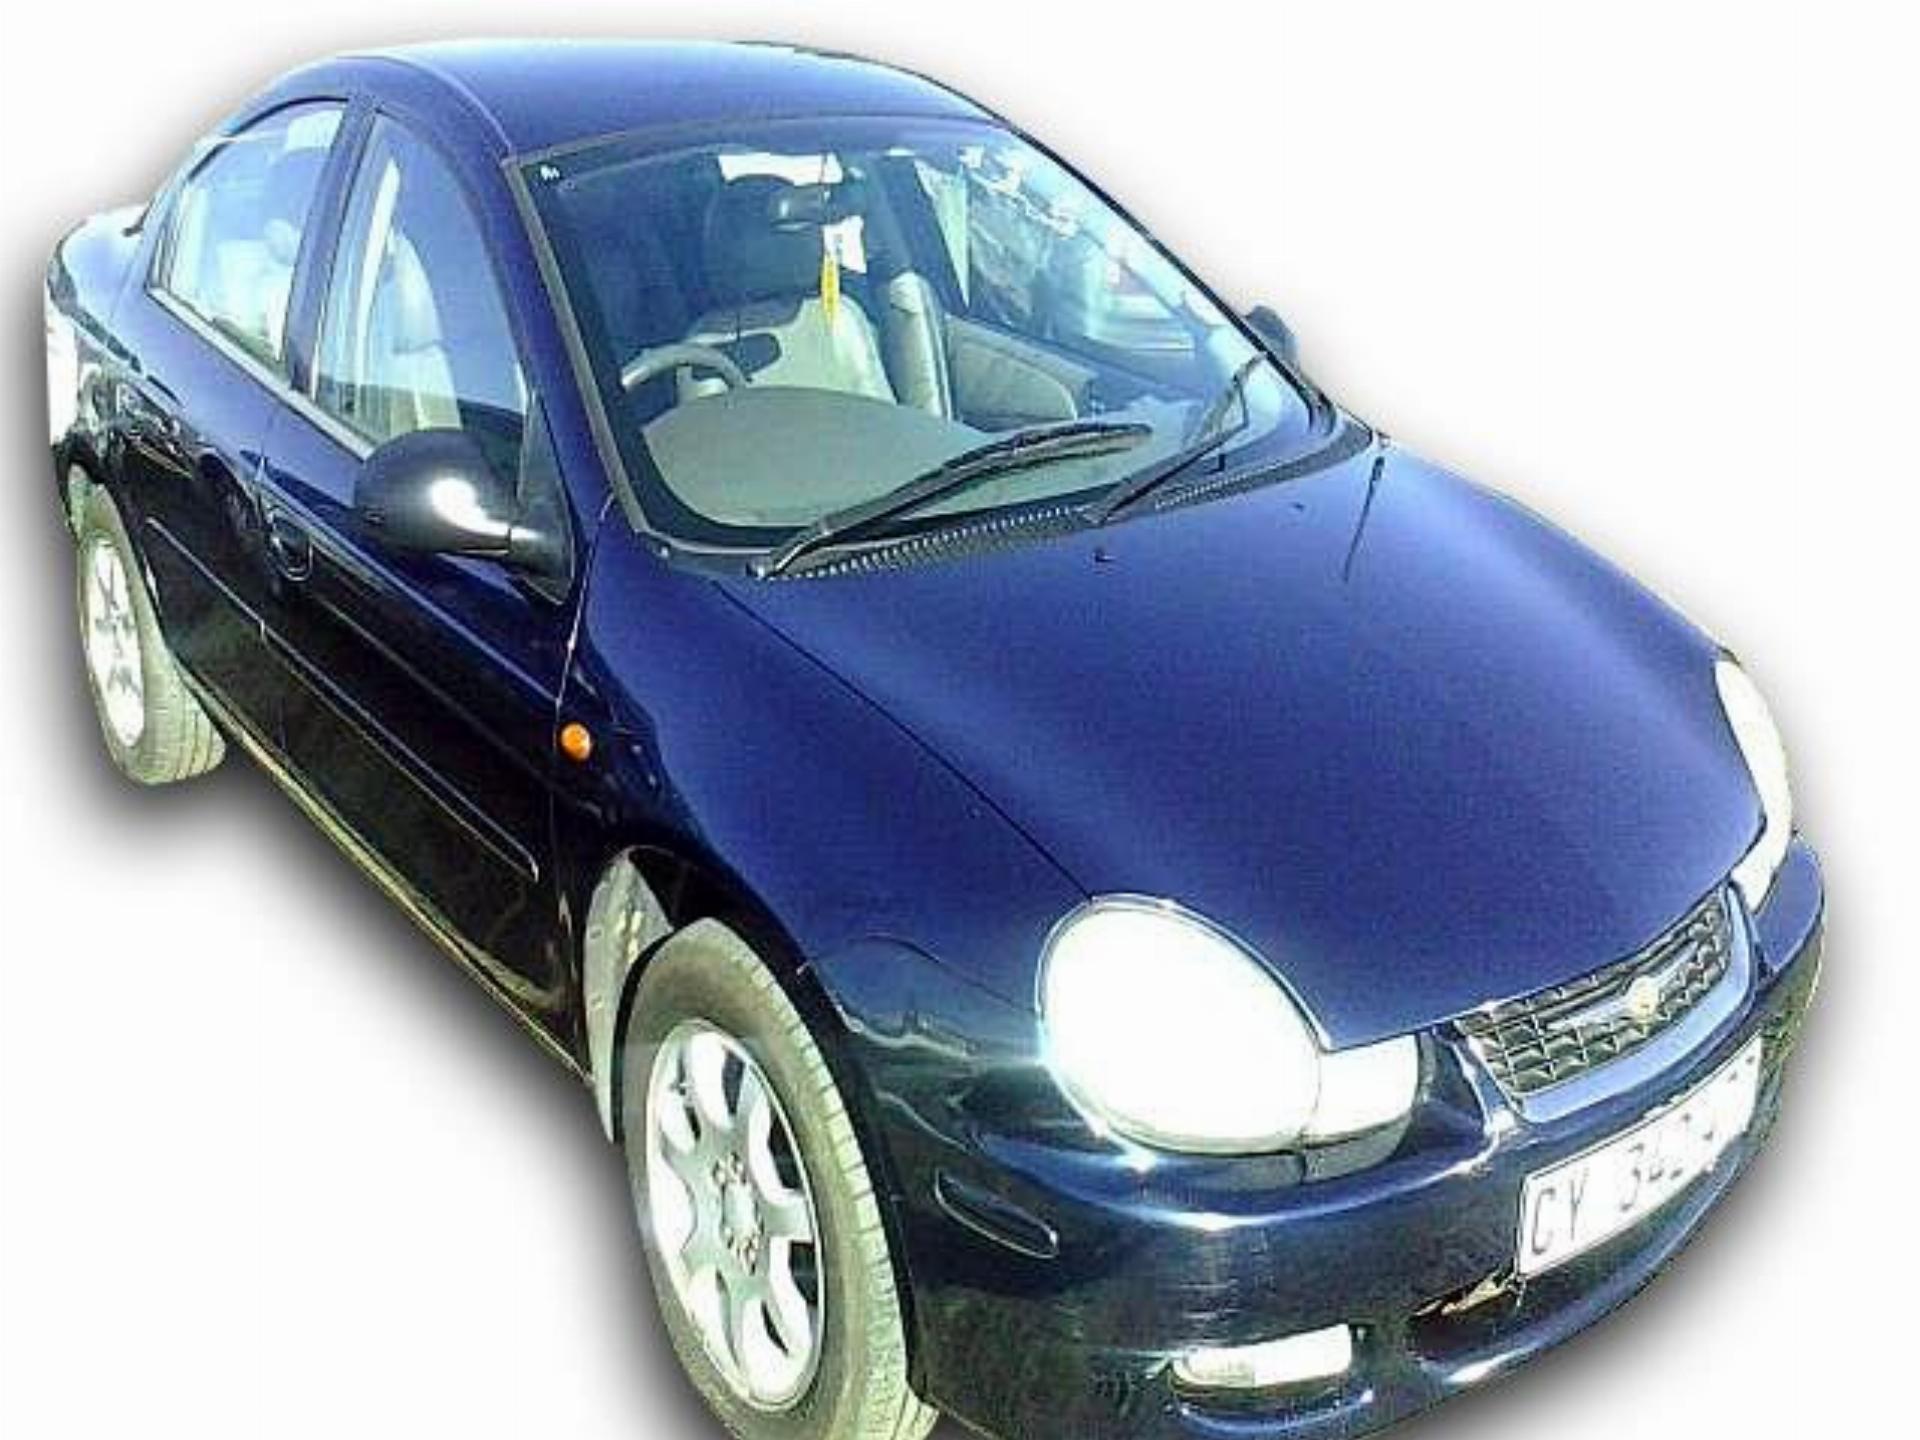 Used Chrysler Neon 2.0 LX Auto 2004 on auction PV1011726